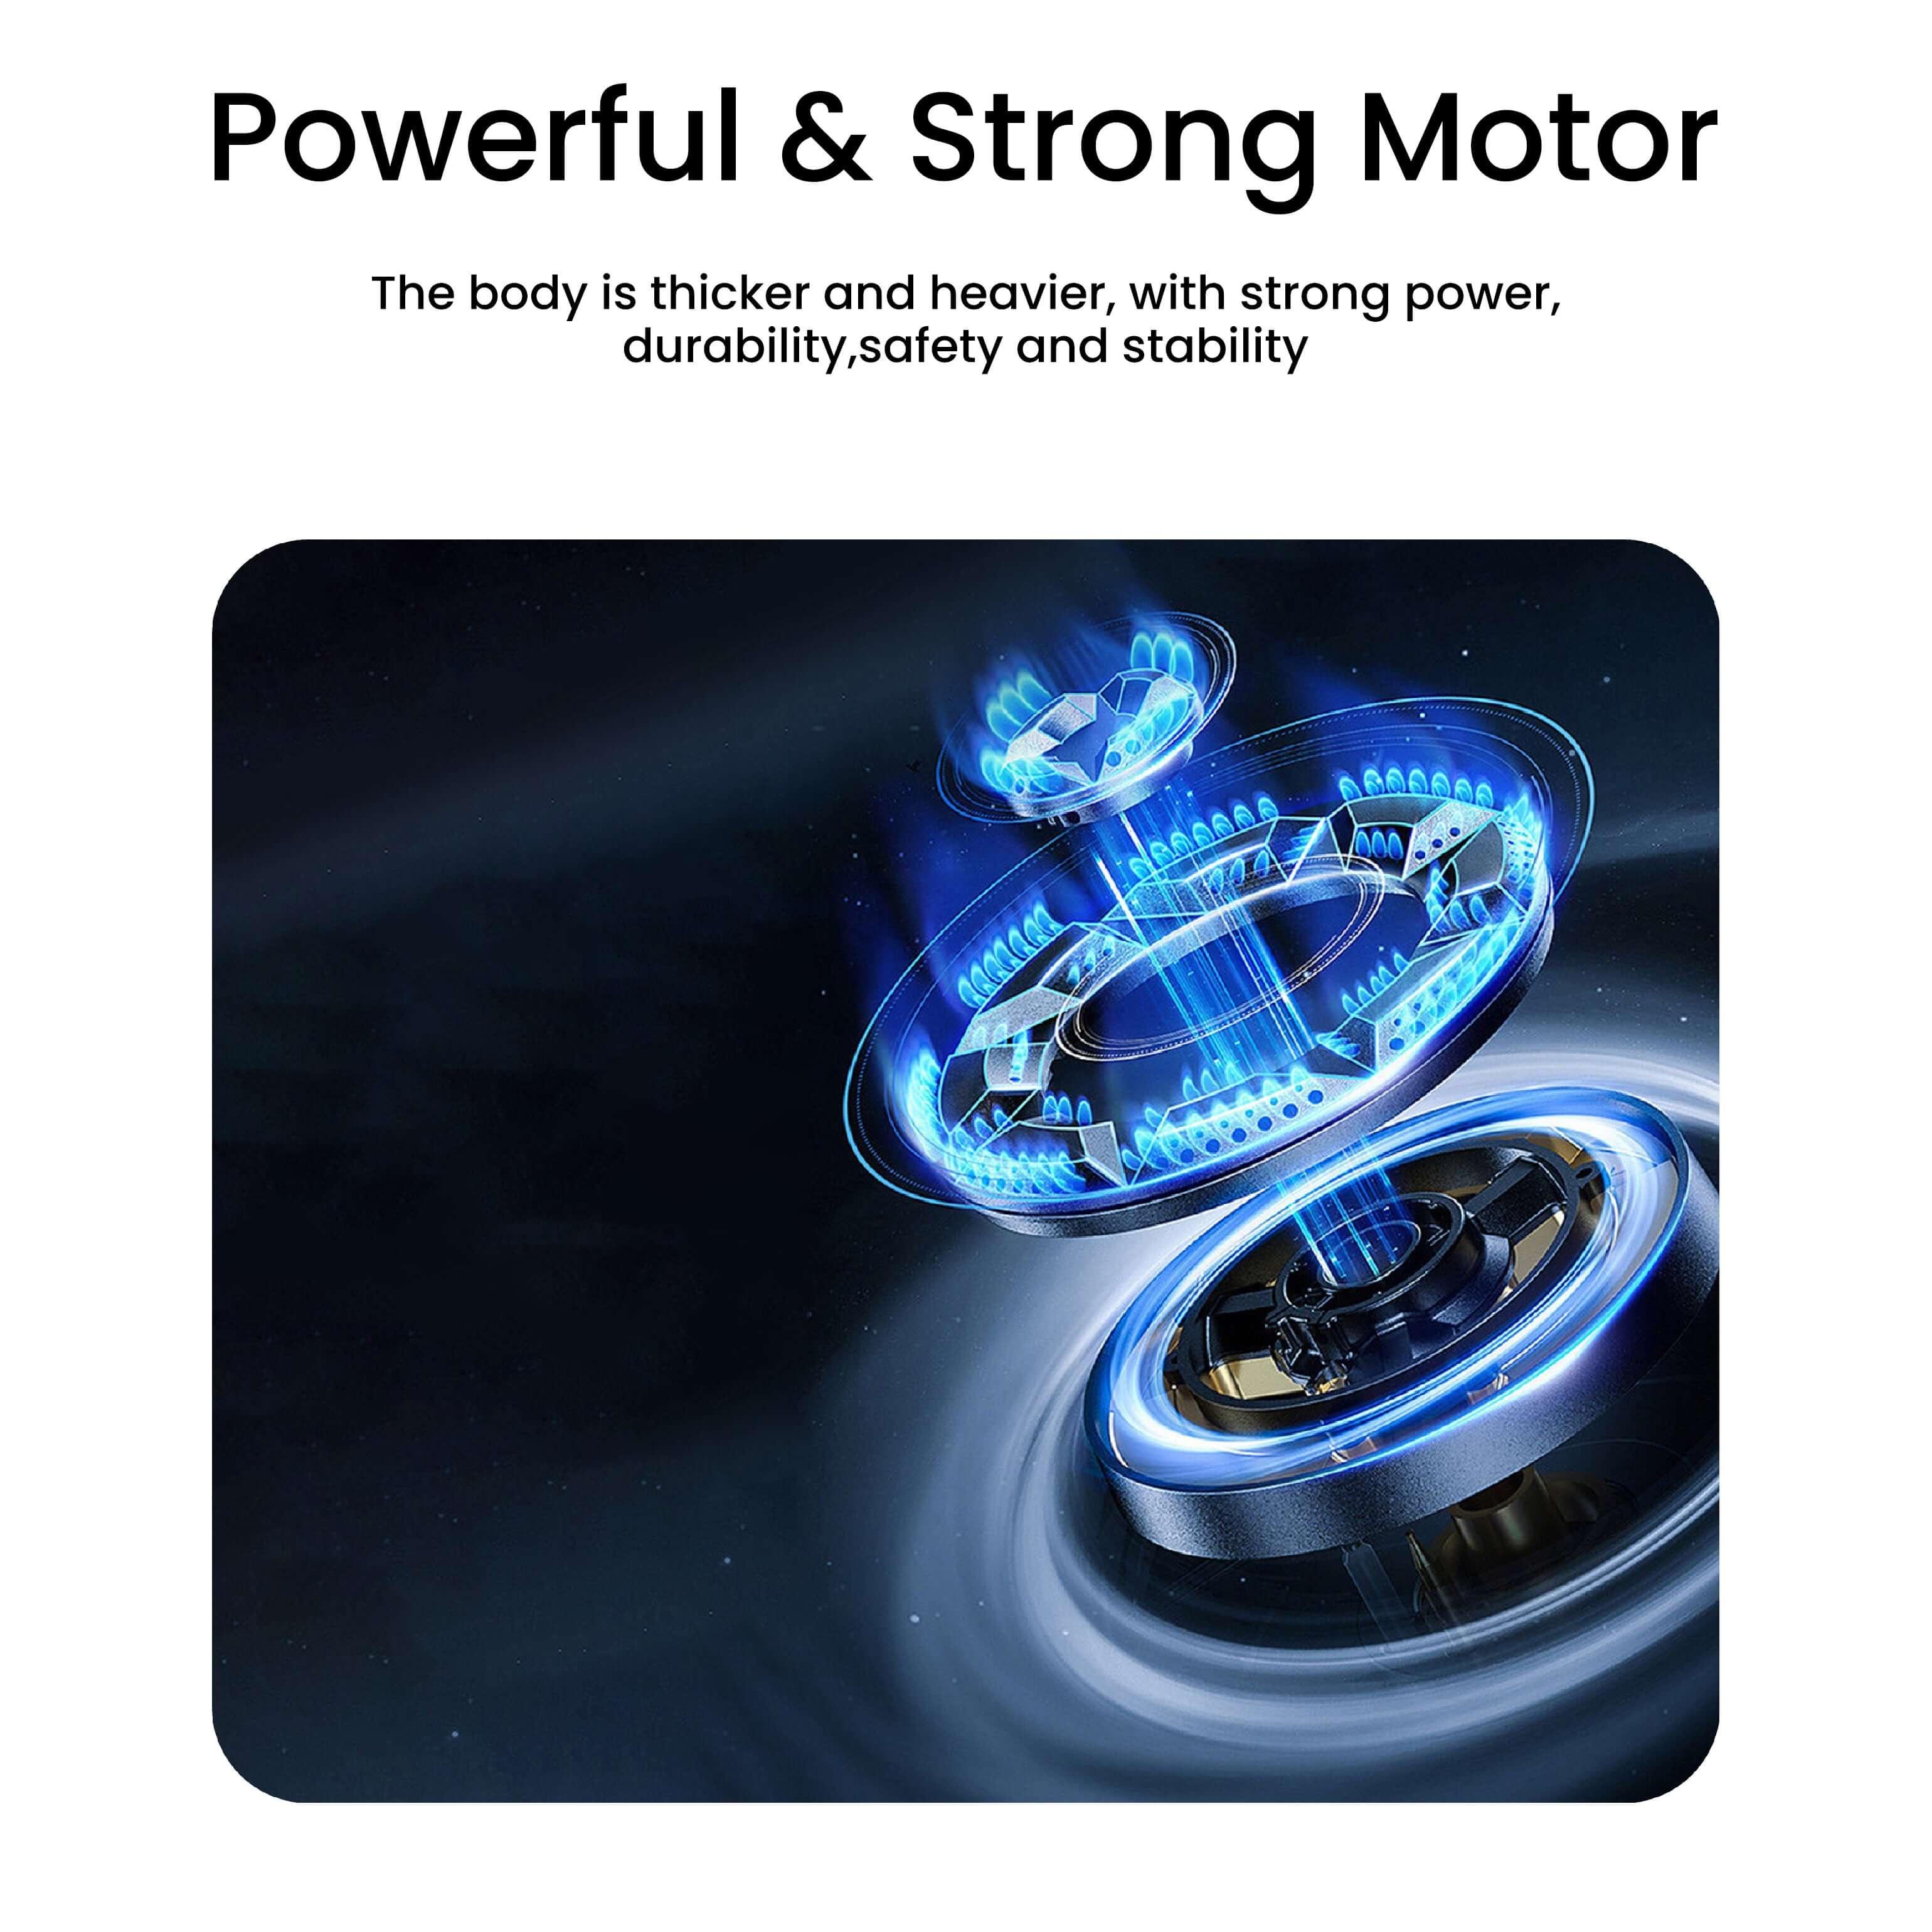 Powerful and strong motor for best massage chair in UAE, massage chair Dubai, كرسي مساج كهربائي, كرسي مساج كرسي استرخاء